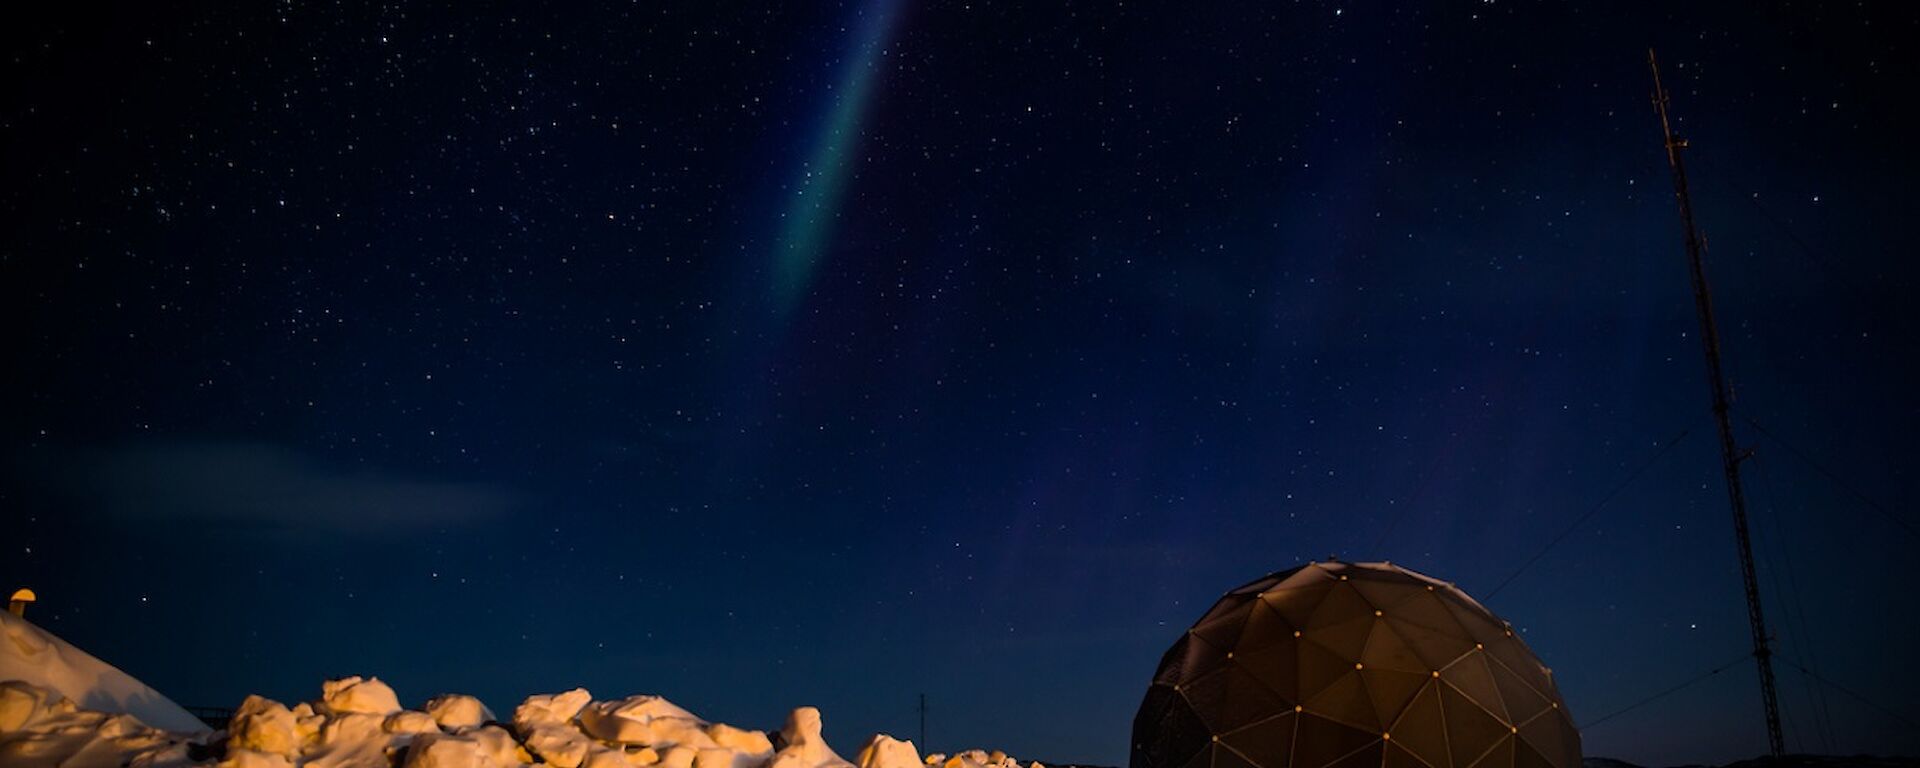 Moonlit snow under a starry sky with a weak aurora by the satellite dome.